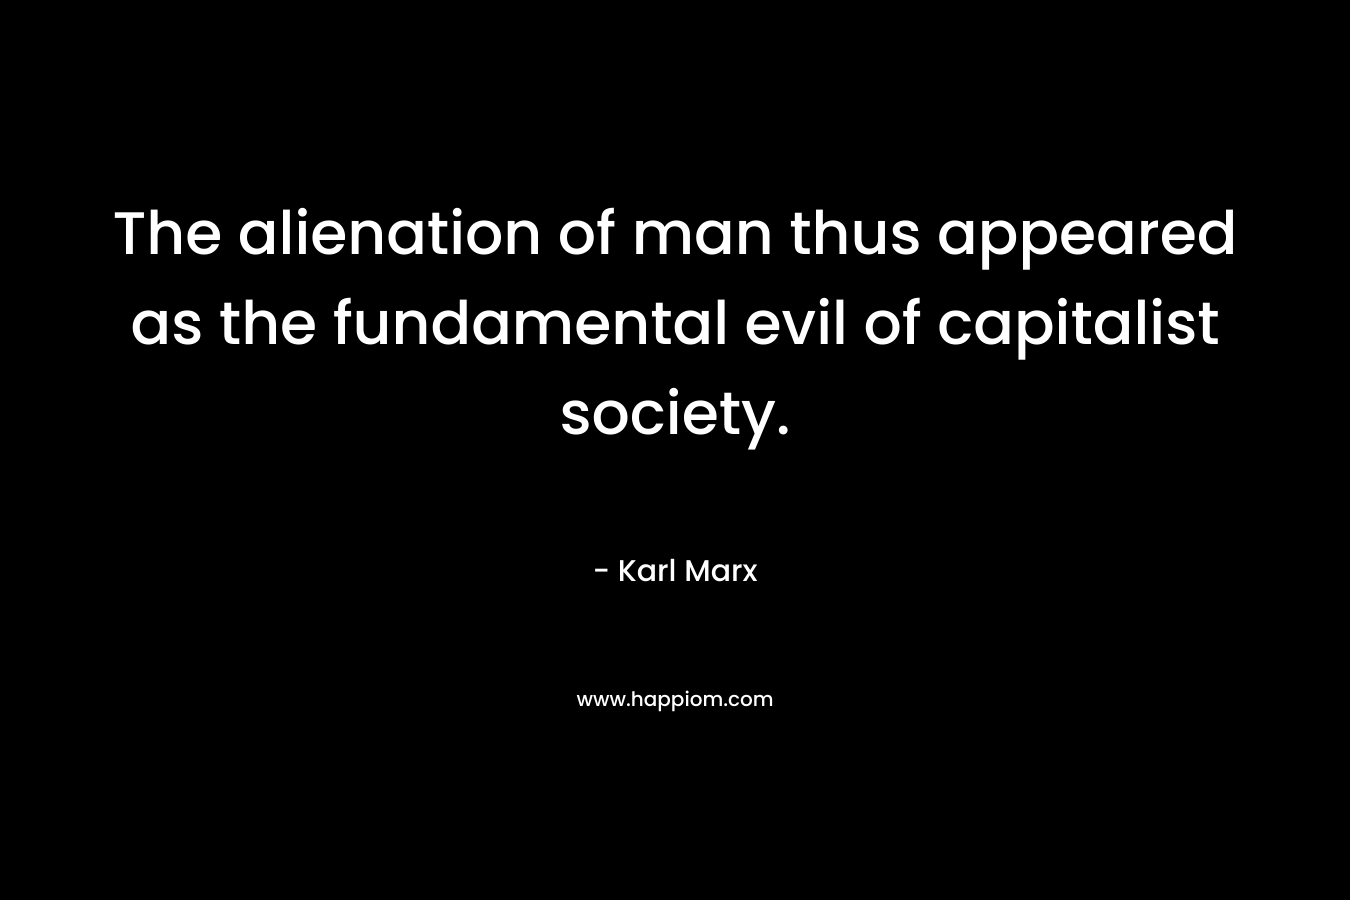 The alienation of man thus appeared as the fundamental evil of capitalist society. – Karl Marx